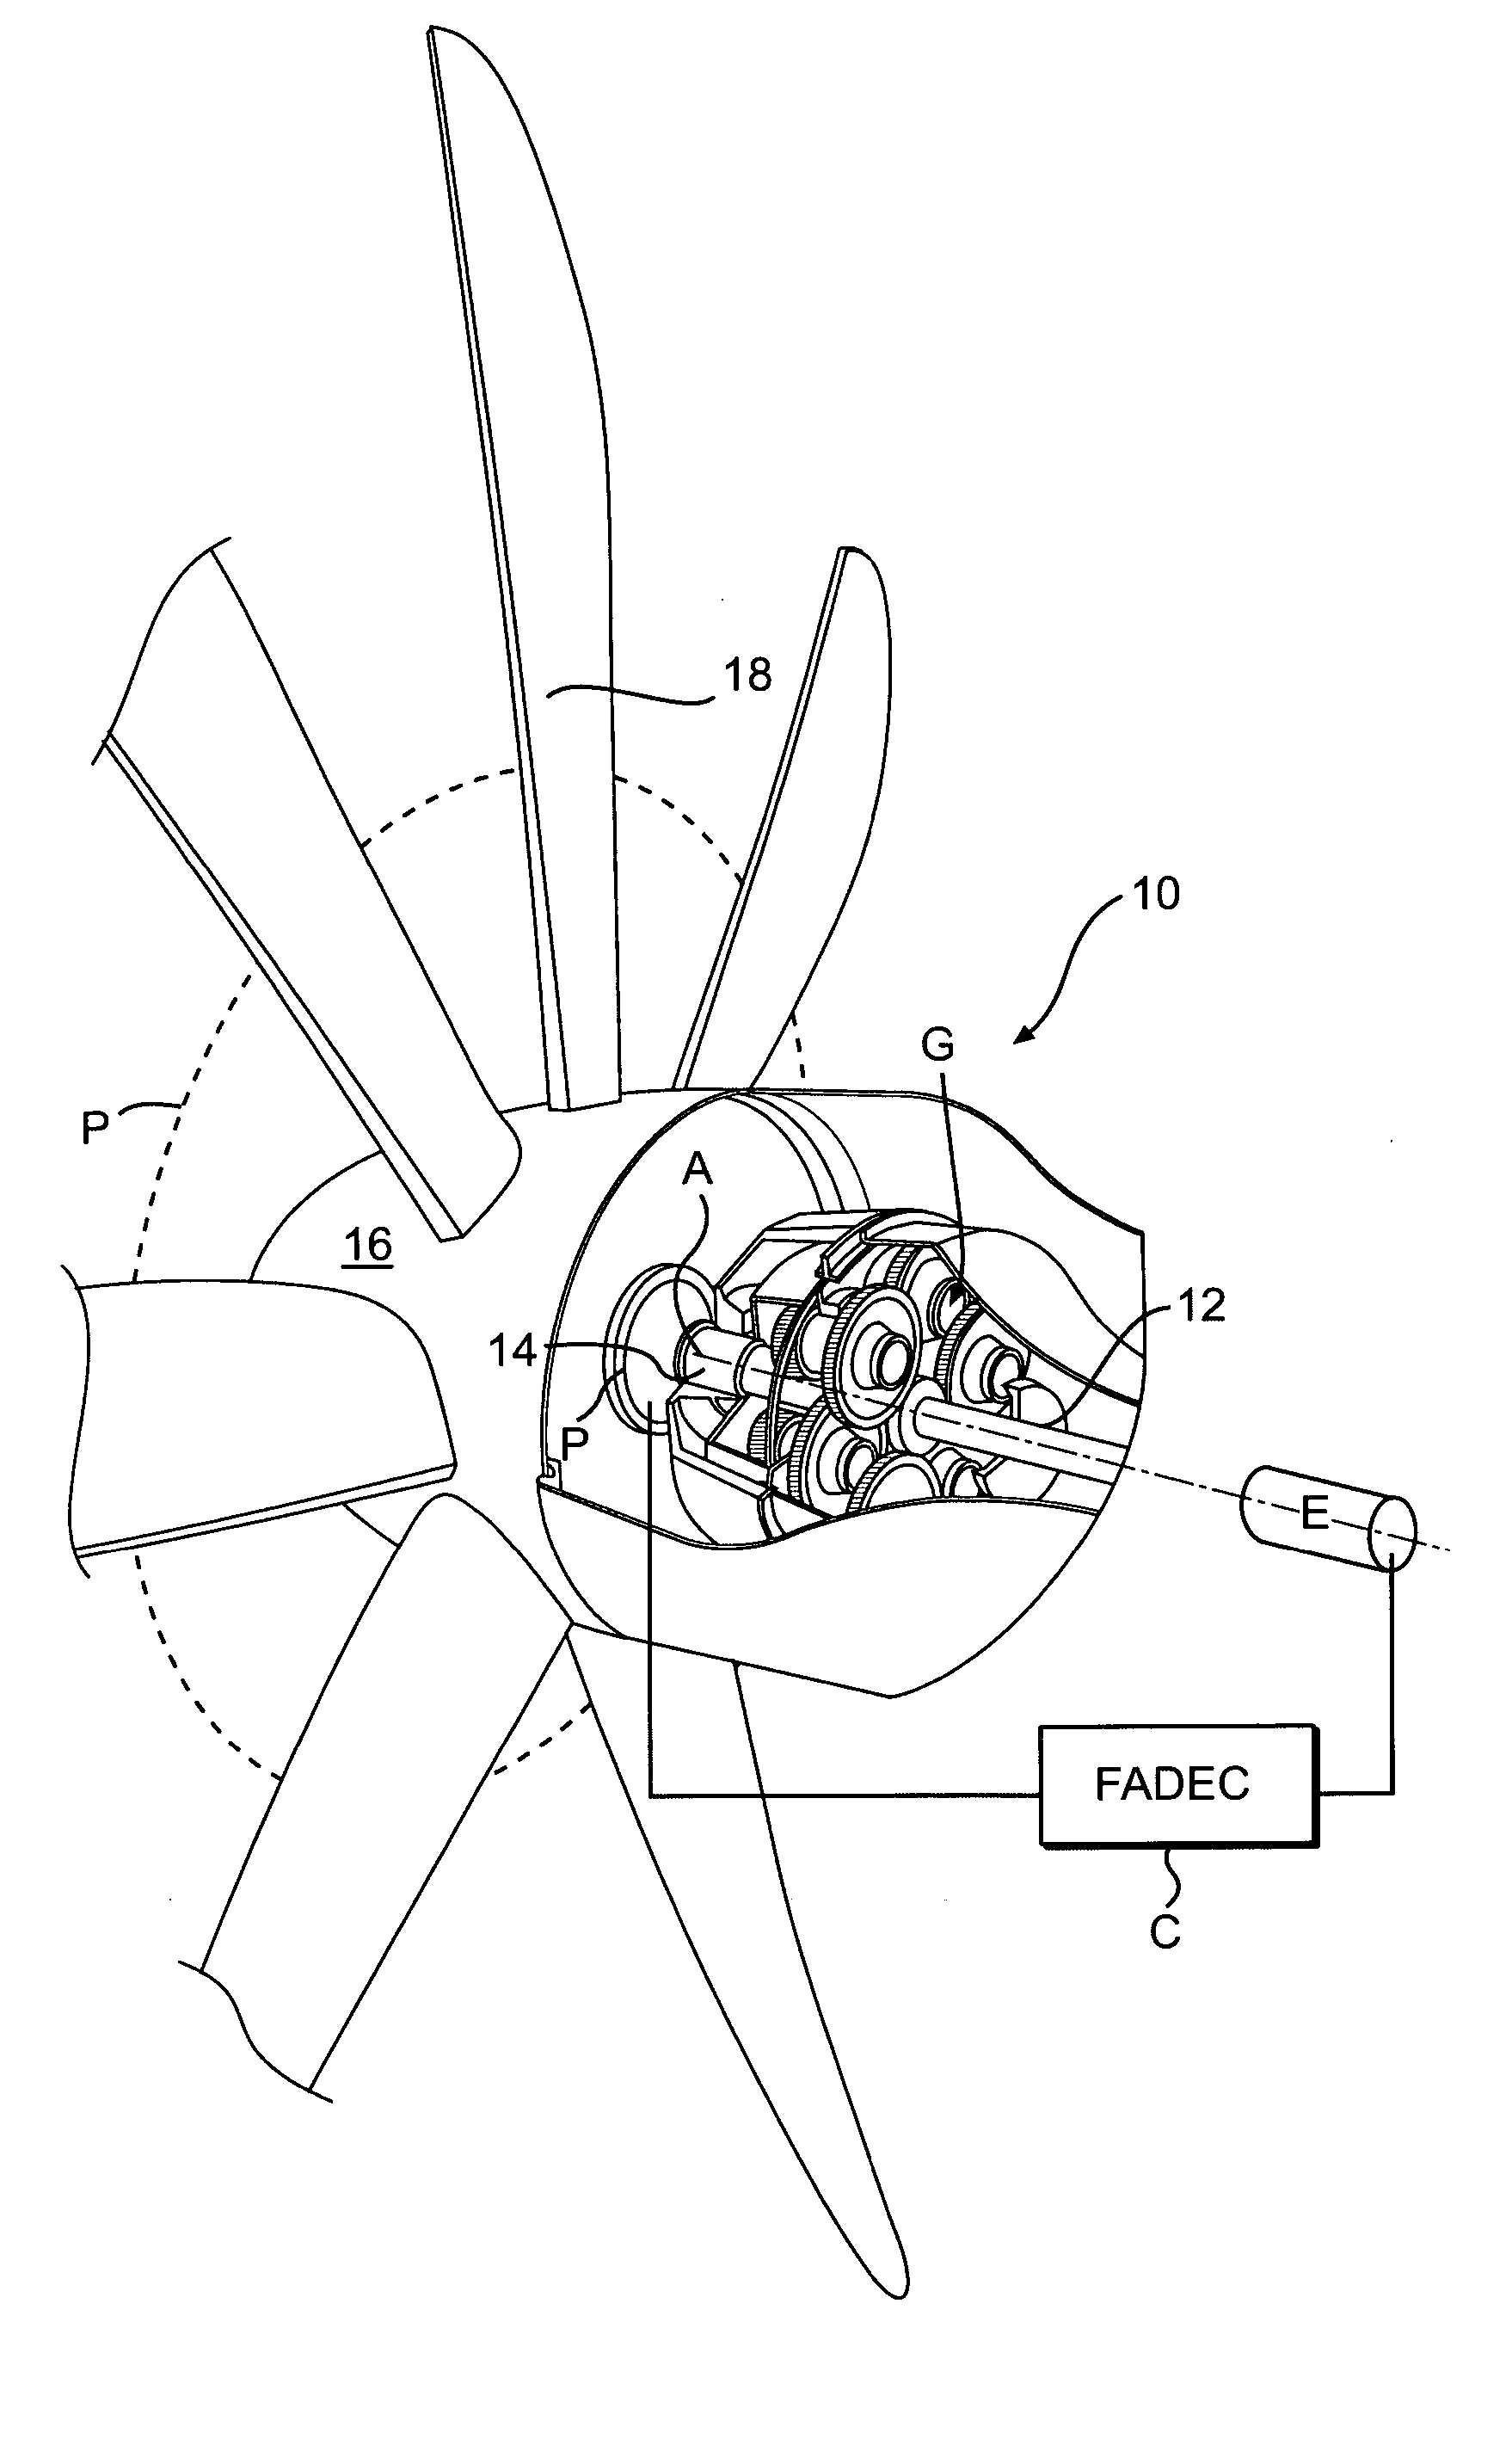 Control logic for a propeller system